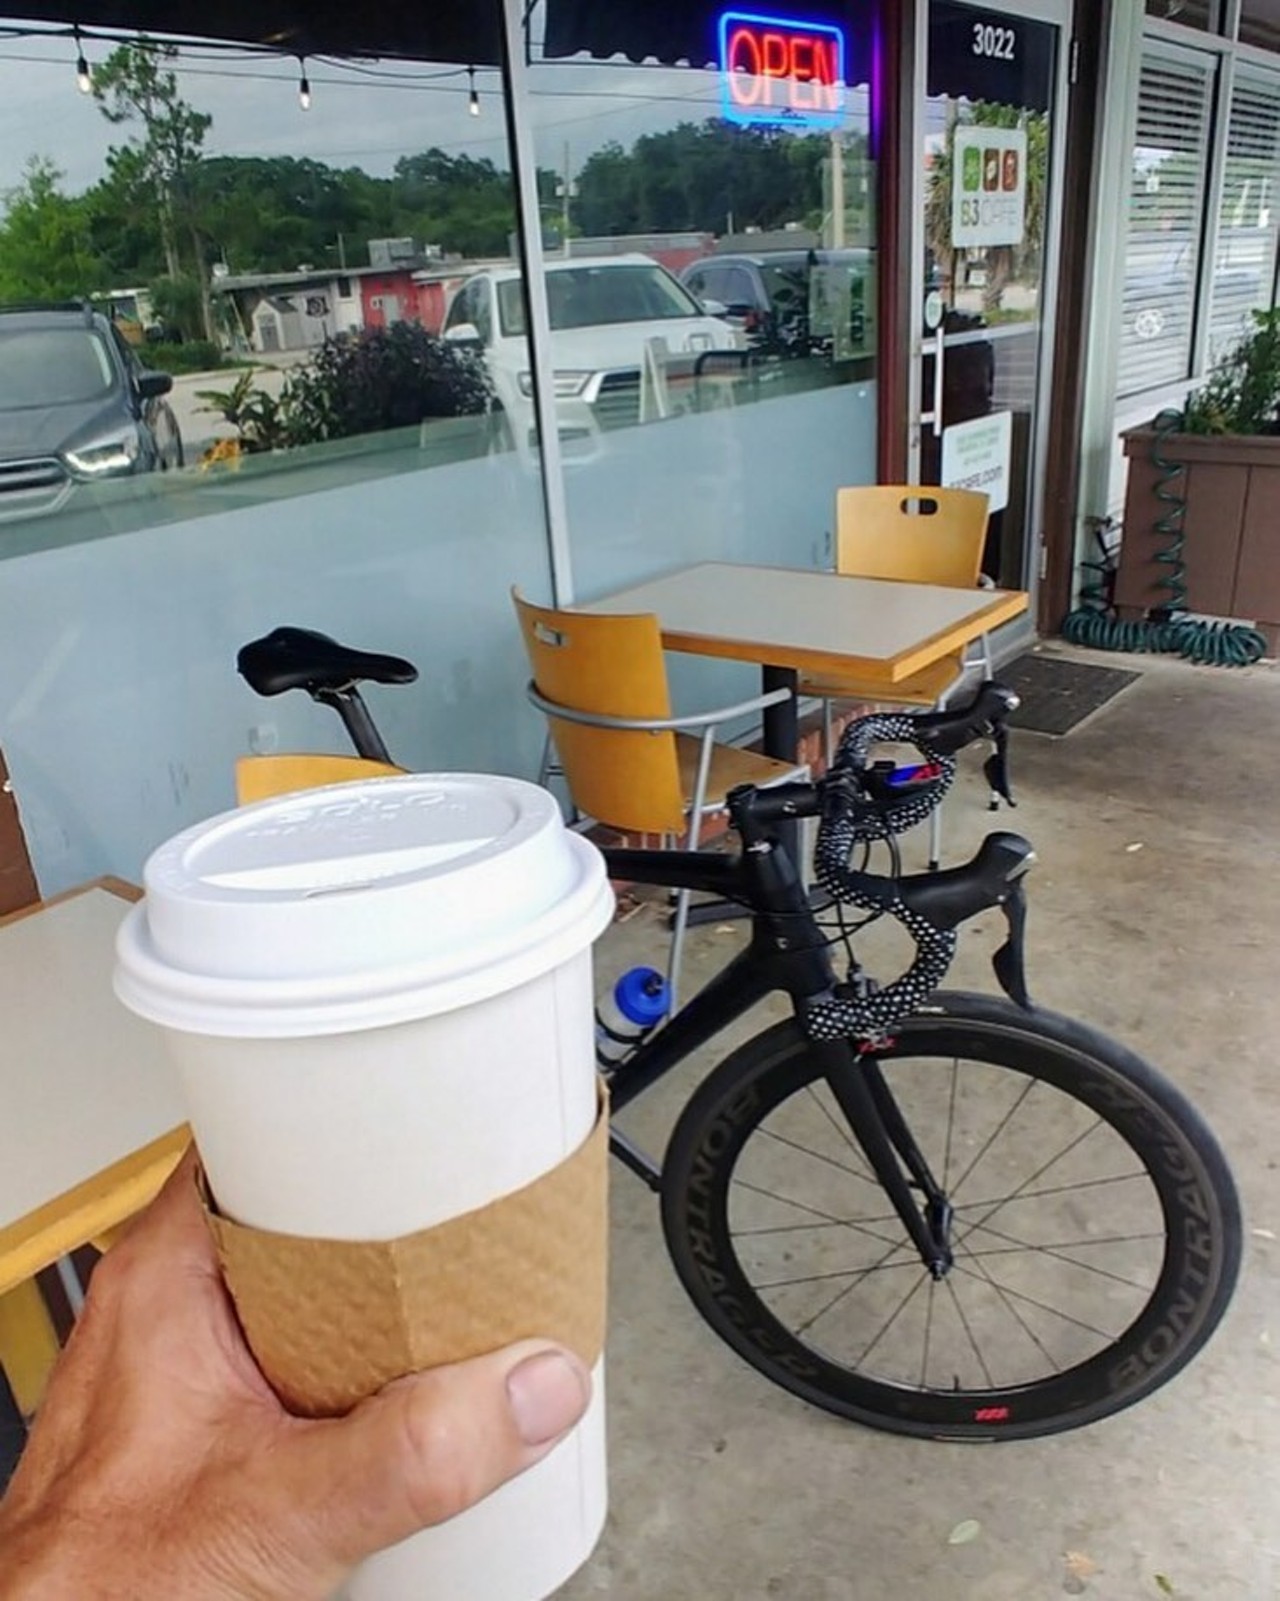 Bikes Beans & Bordeaux  
3022 Corrine Dr, Orlando, FL 32803, (407) 427-1440
They have the finest coffee, wine and food and you can enjoy all those treats at the outdoor seating area with your pets. 
Photo via Bike Beans & Bordeaux Cafe/Facebook